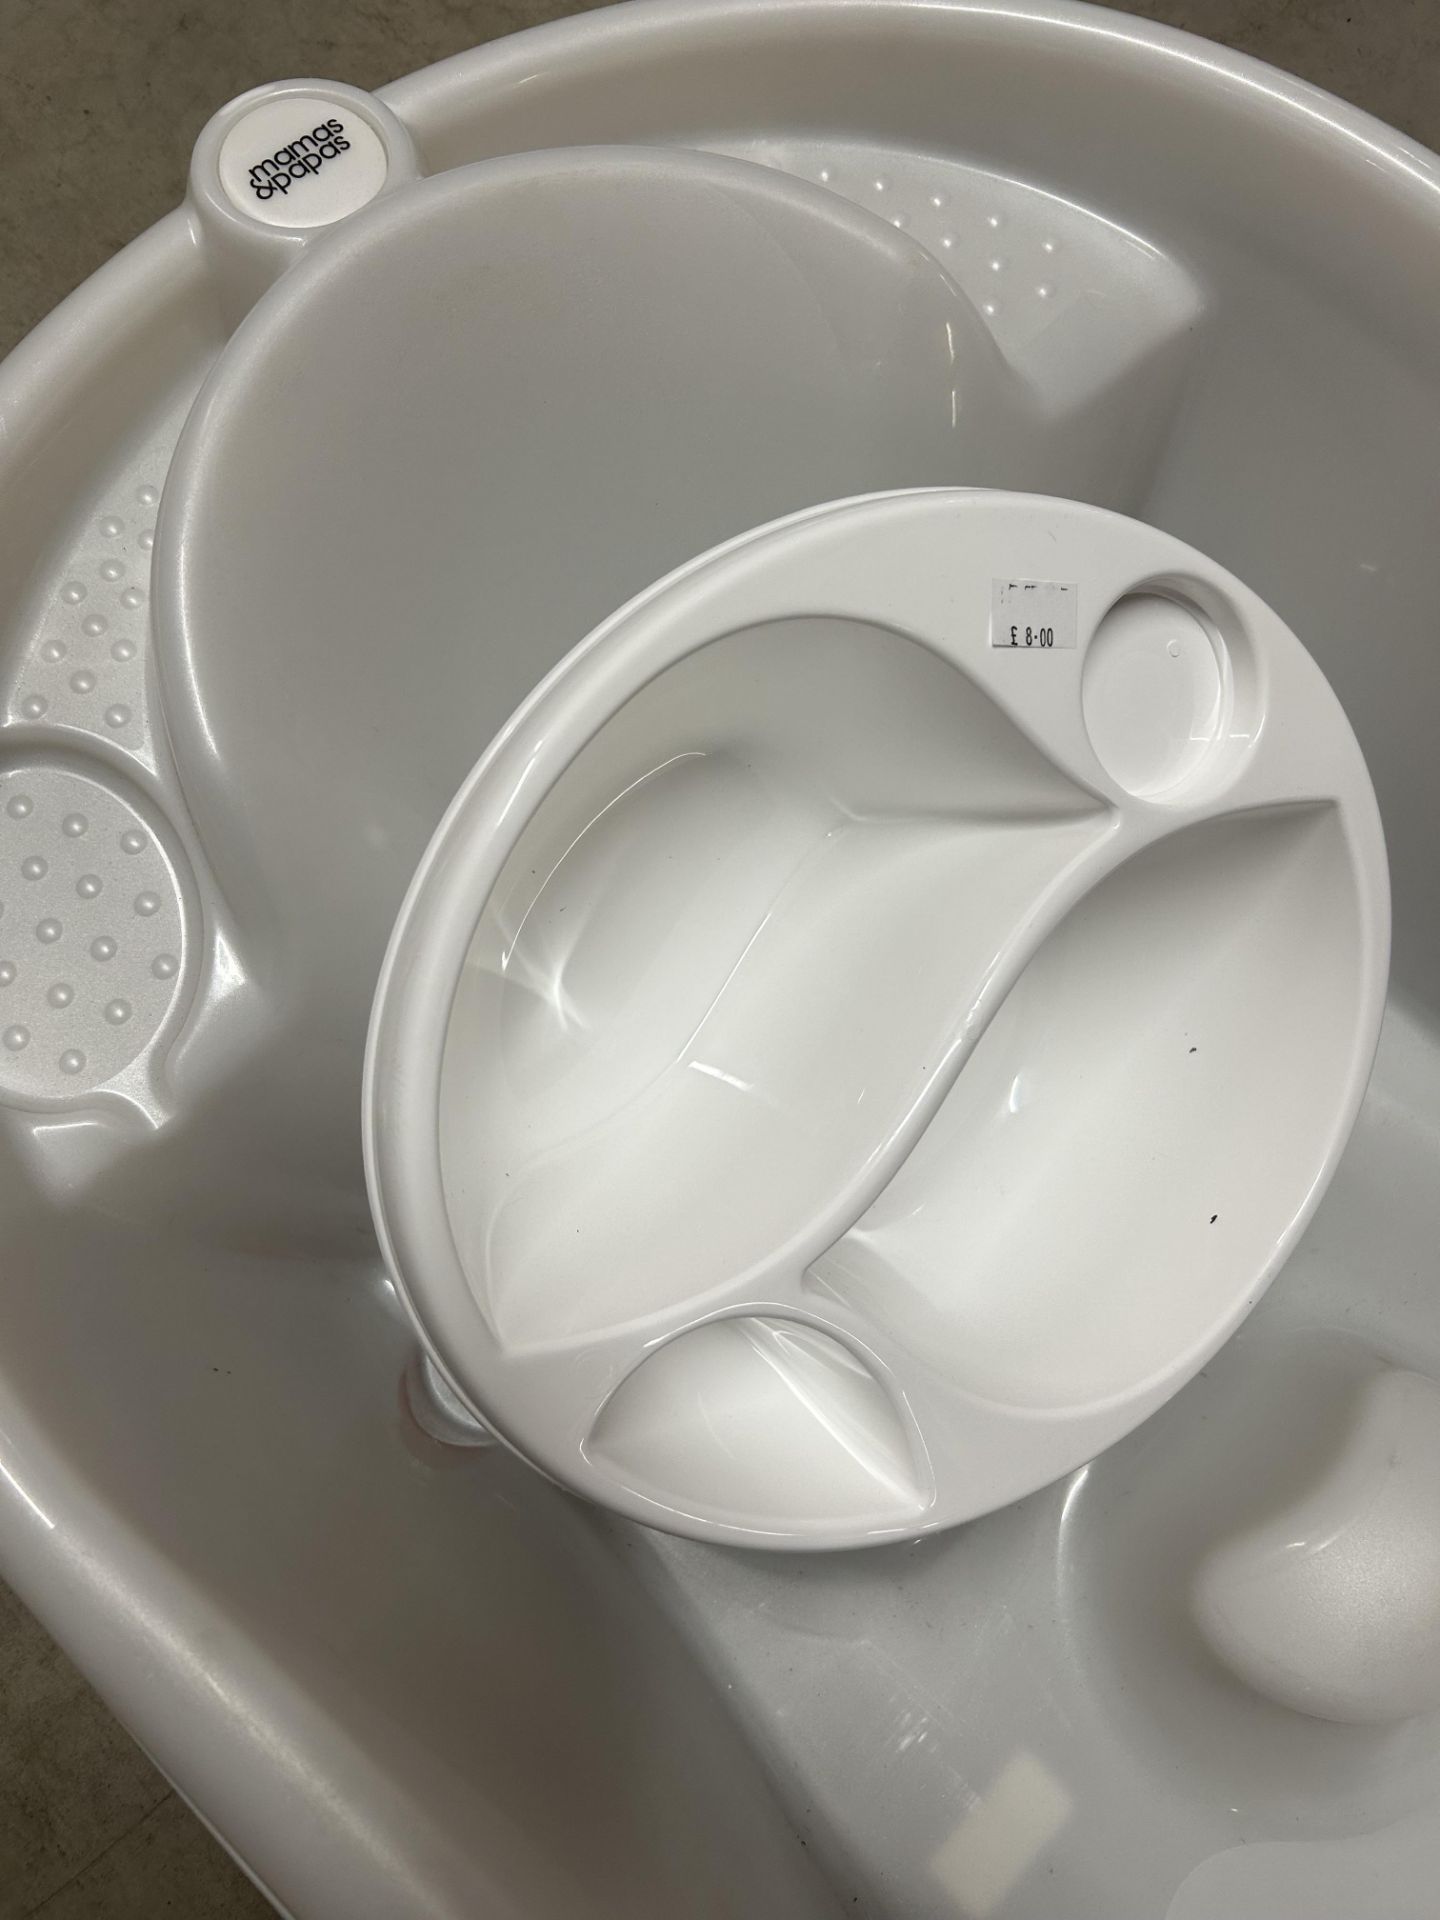 MAMAS AND PAPAS MOULDED SAFETY BABY BATH WITH TOP AND TAIL BOWL NEW UNUSED RRP £38 (Saleroom - Image 3 of 4